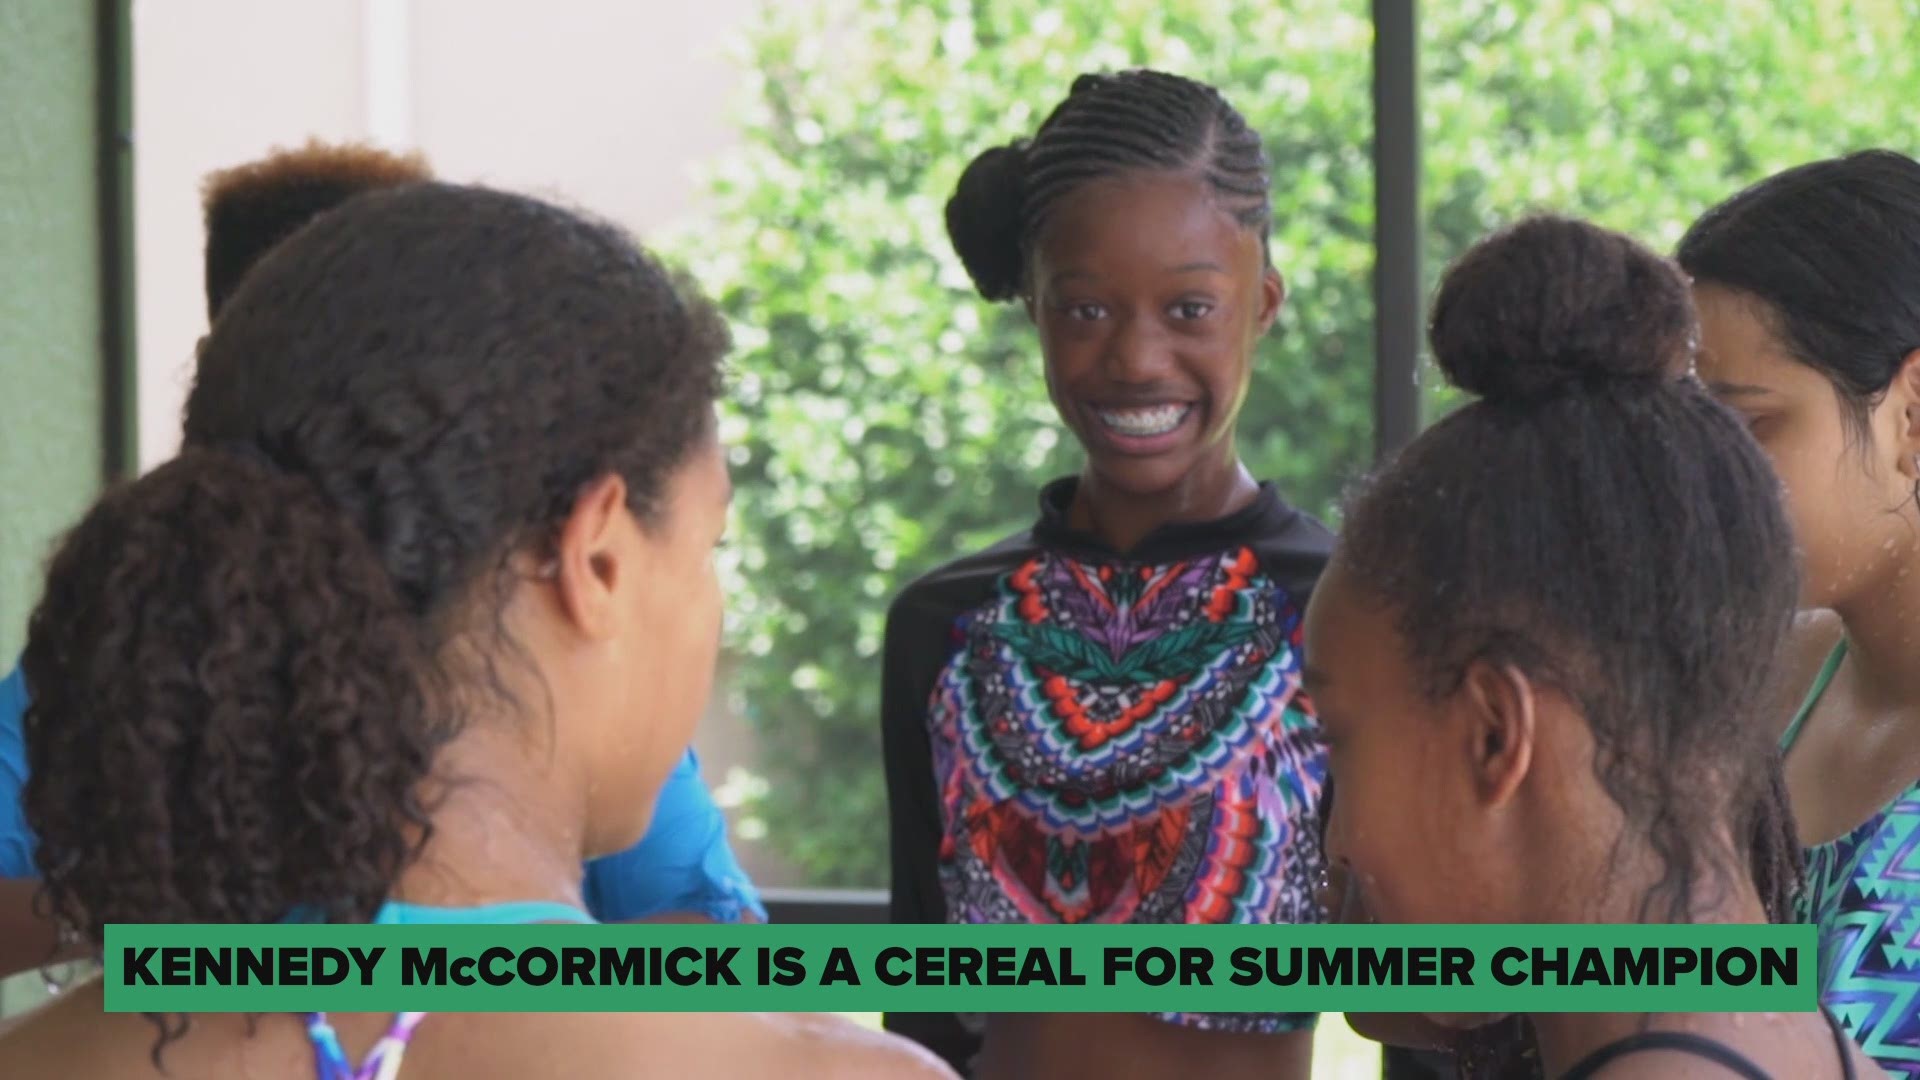 Kennedy McCormick’s good works caught the eye of General Mills.